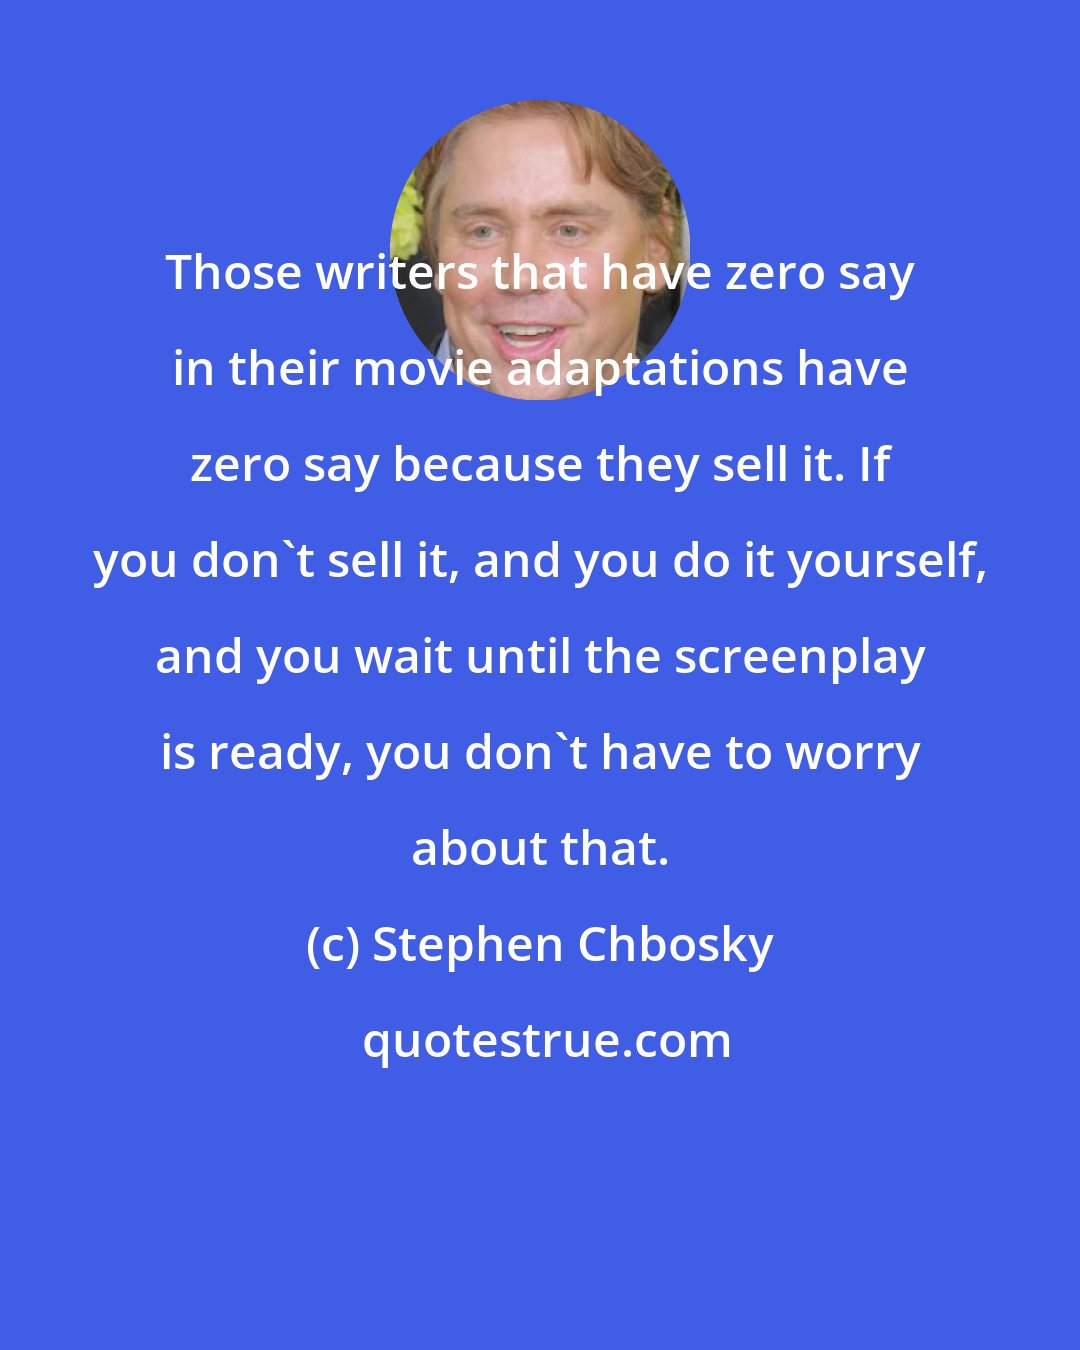 Stephen Chbosky: Those writers that have zero say in their movie adaptations have zero say because they sell it. If you don't sell it, and you do it yourself, and you wait until the screenplay is ready, you don't have to worry about that.